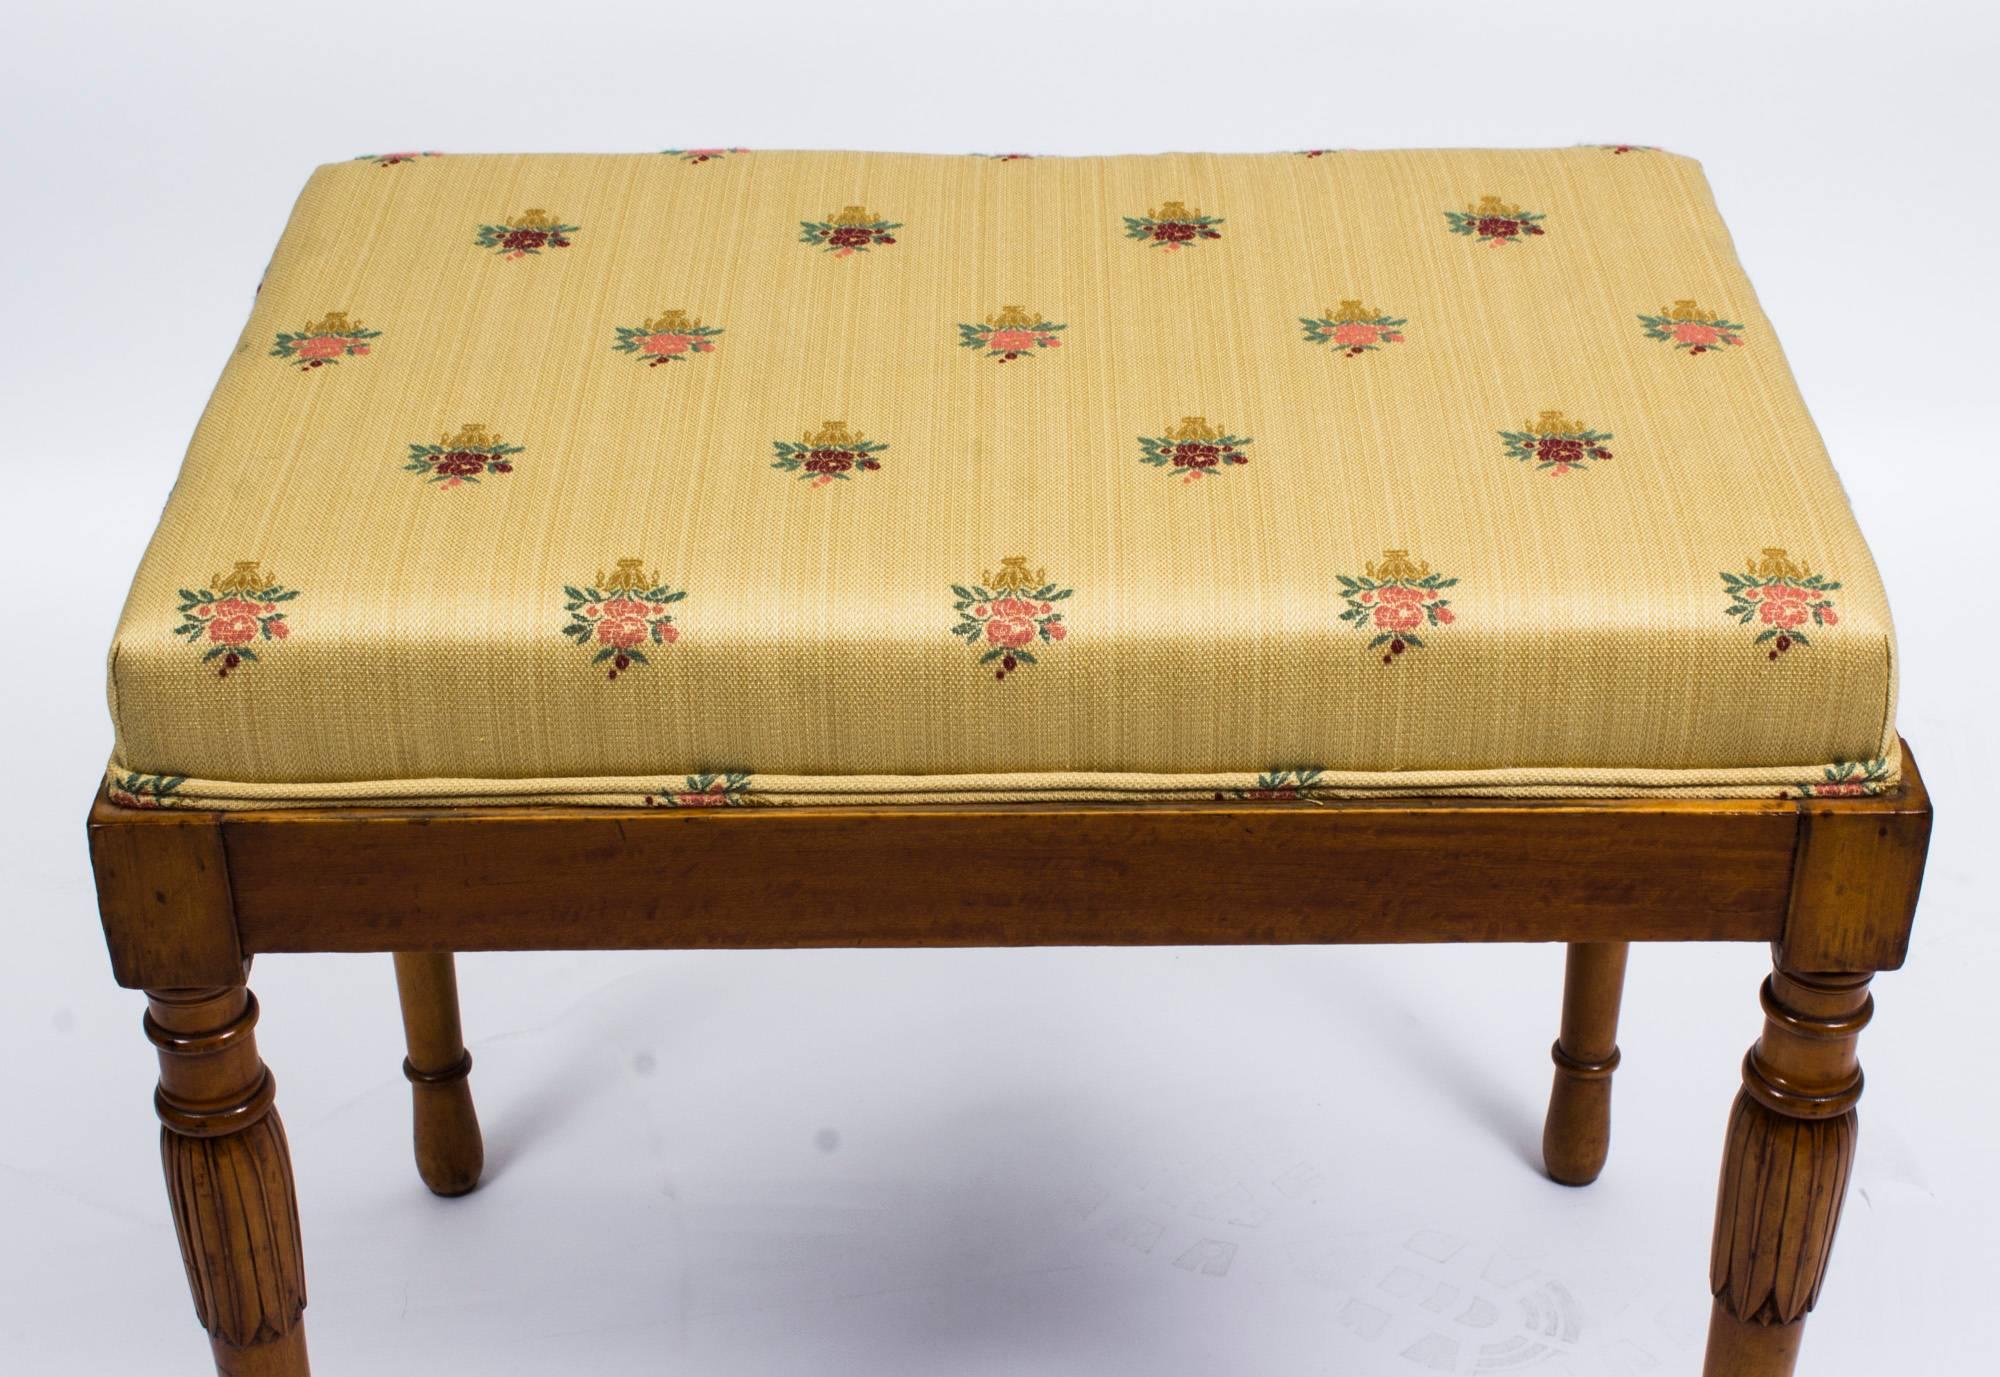 This is a superb antique English Edwardian satinwood stool, circa 1900 in date.

The stool has been upholstered in a lovely sandy linen with occasional flower bunches. 

There is no mistaking its high quality and unique design, which is certain